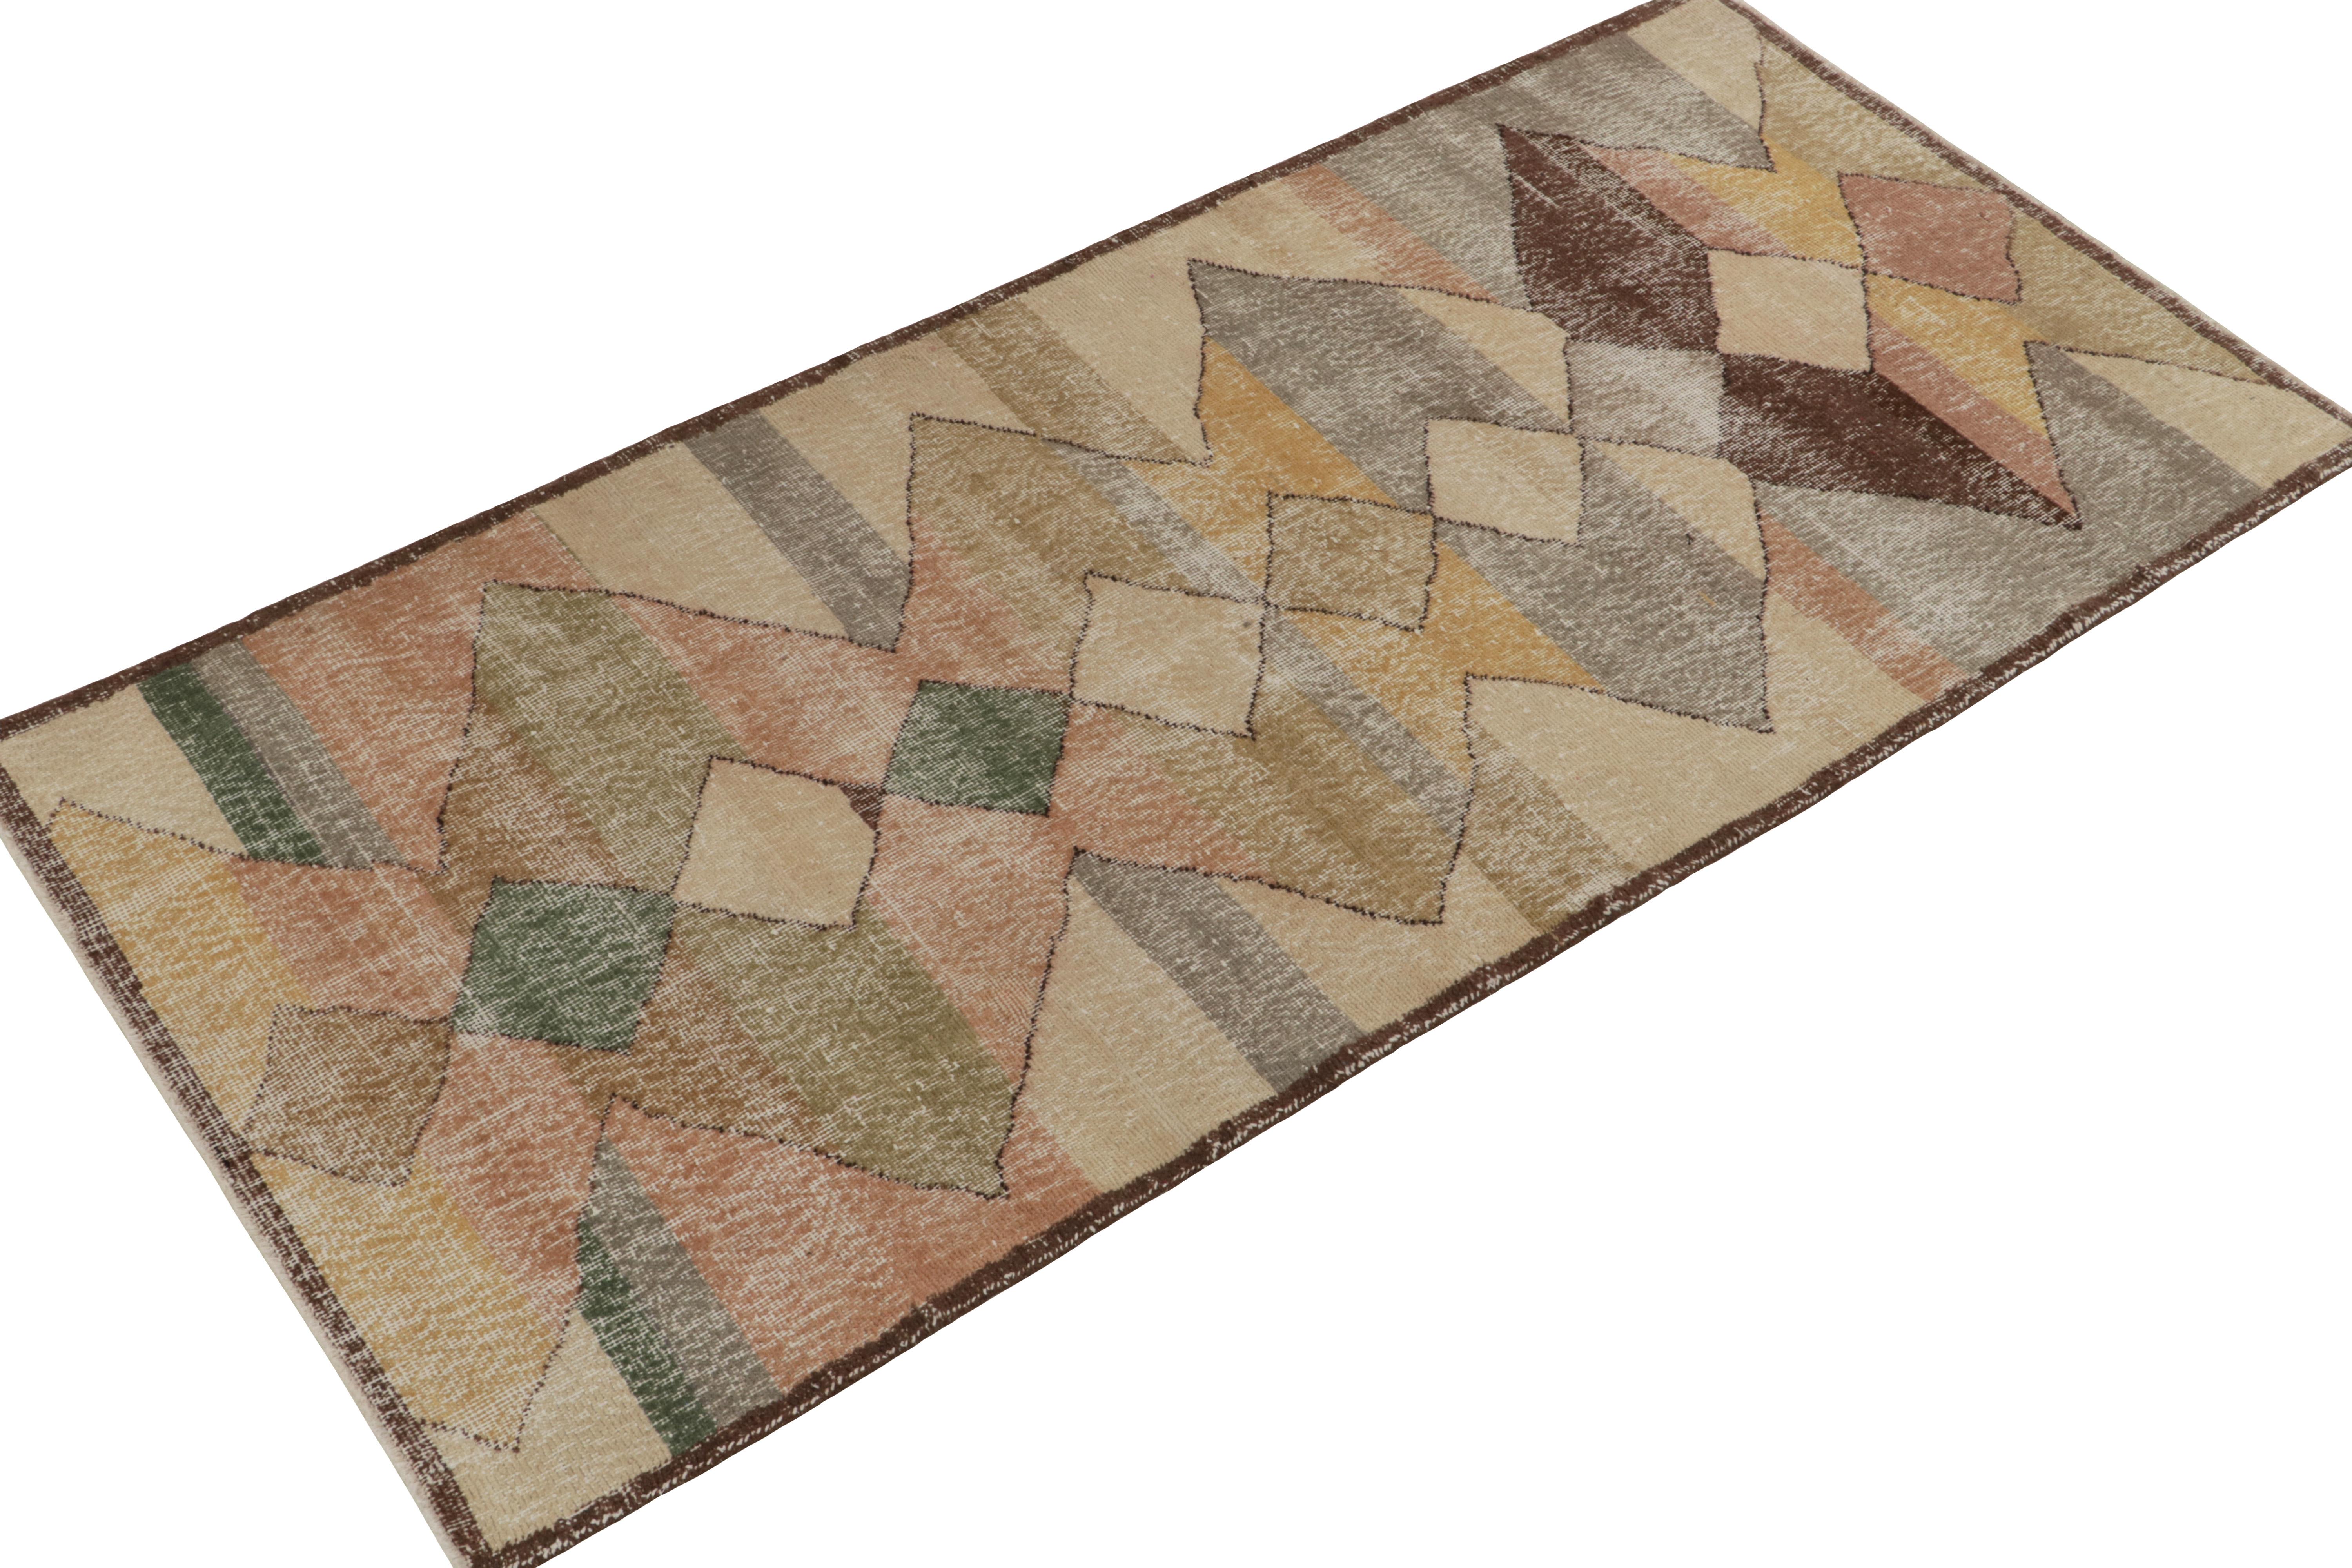 Hand-knotted in wool, a 4x8 vintage rug from a bold Turkish designer, entering Rug & Kilim’s commemorative Mid-Century Pasha Collection. 

The 1960s take on Art Deco style relishes a geometric pattern in subtle beige-brown with vibrant pink, green